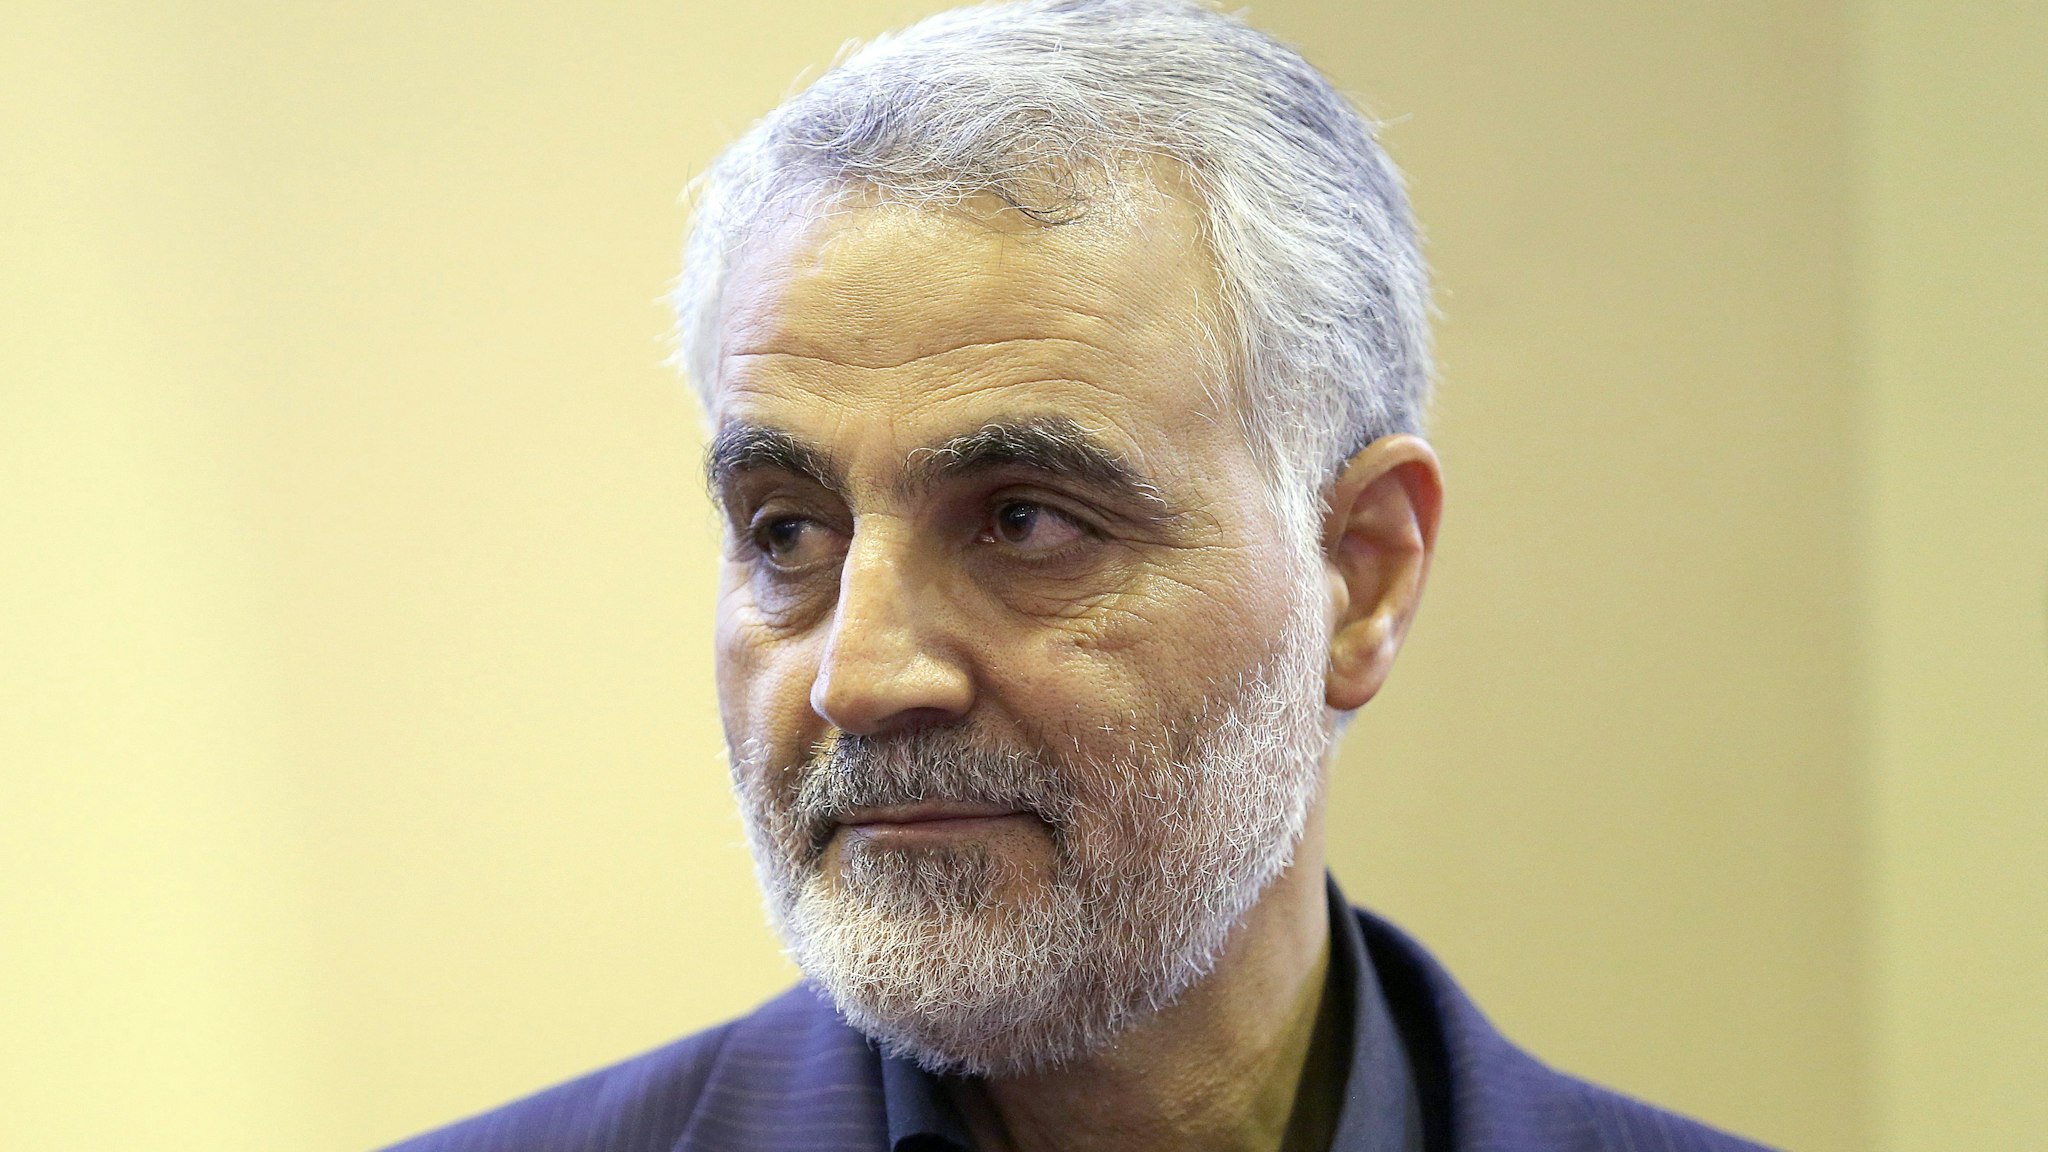 (FILES) In this picture taken on September 14, 2013, the commander of the Iranian Revolutionary Guard's Quds Force, Gen. Qassem Soleimani, is seen as people pay their condolences following the death of his mother in Tehran. For a man widely reported to be playing a key role in helping Iraq's routed military recover lost ground, Qassem Soleimani, 57, the commander of Iran's feared Quds Force, remains invisible.